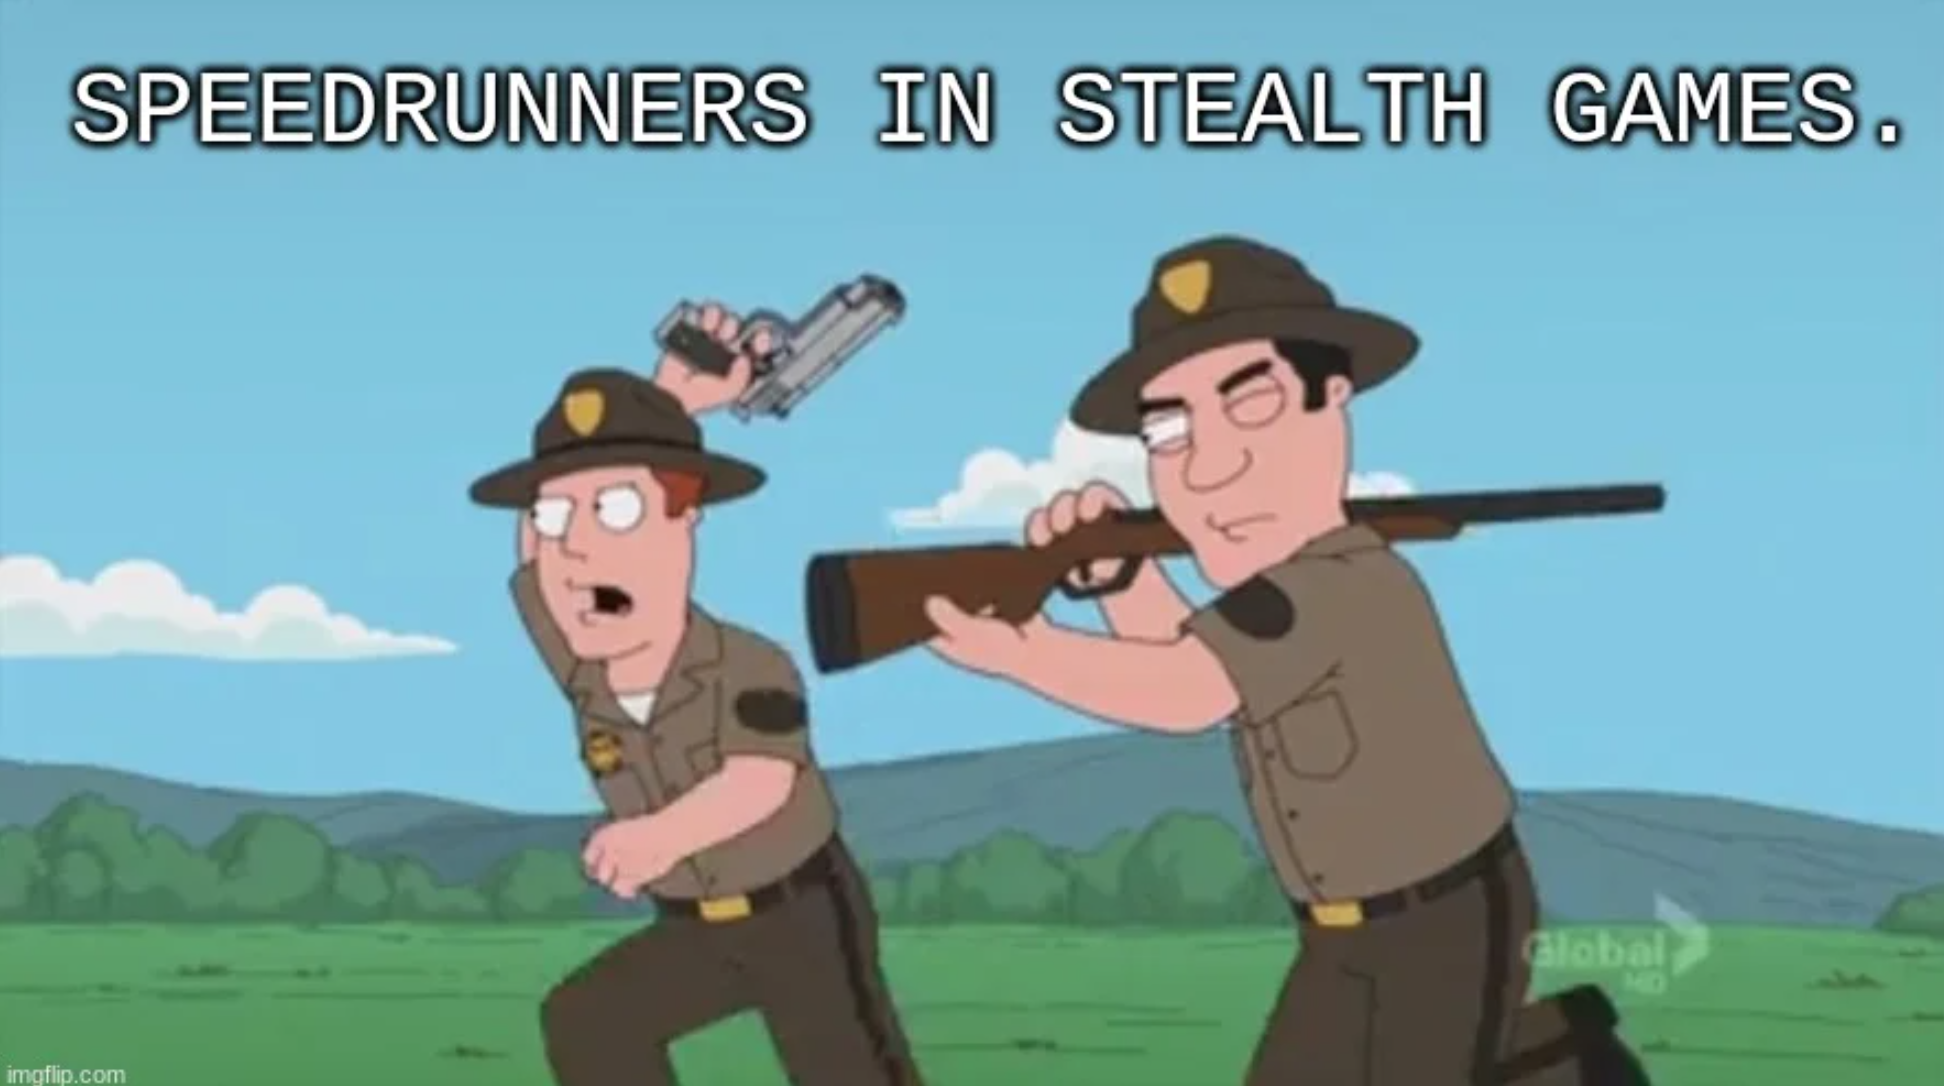 funny gaming memes - cod funny - Speedrunners In Stealth Games. Globo mo